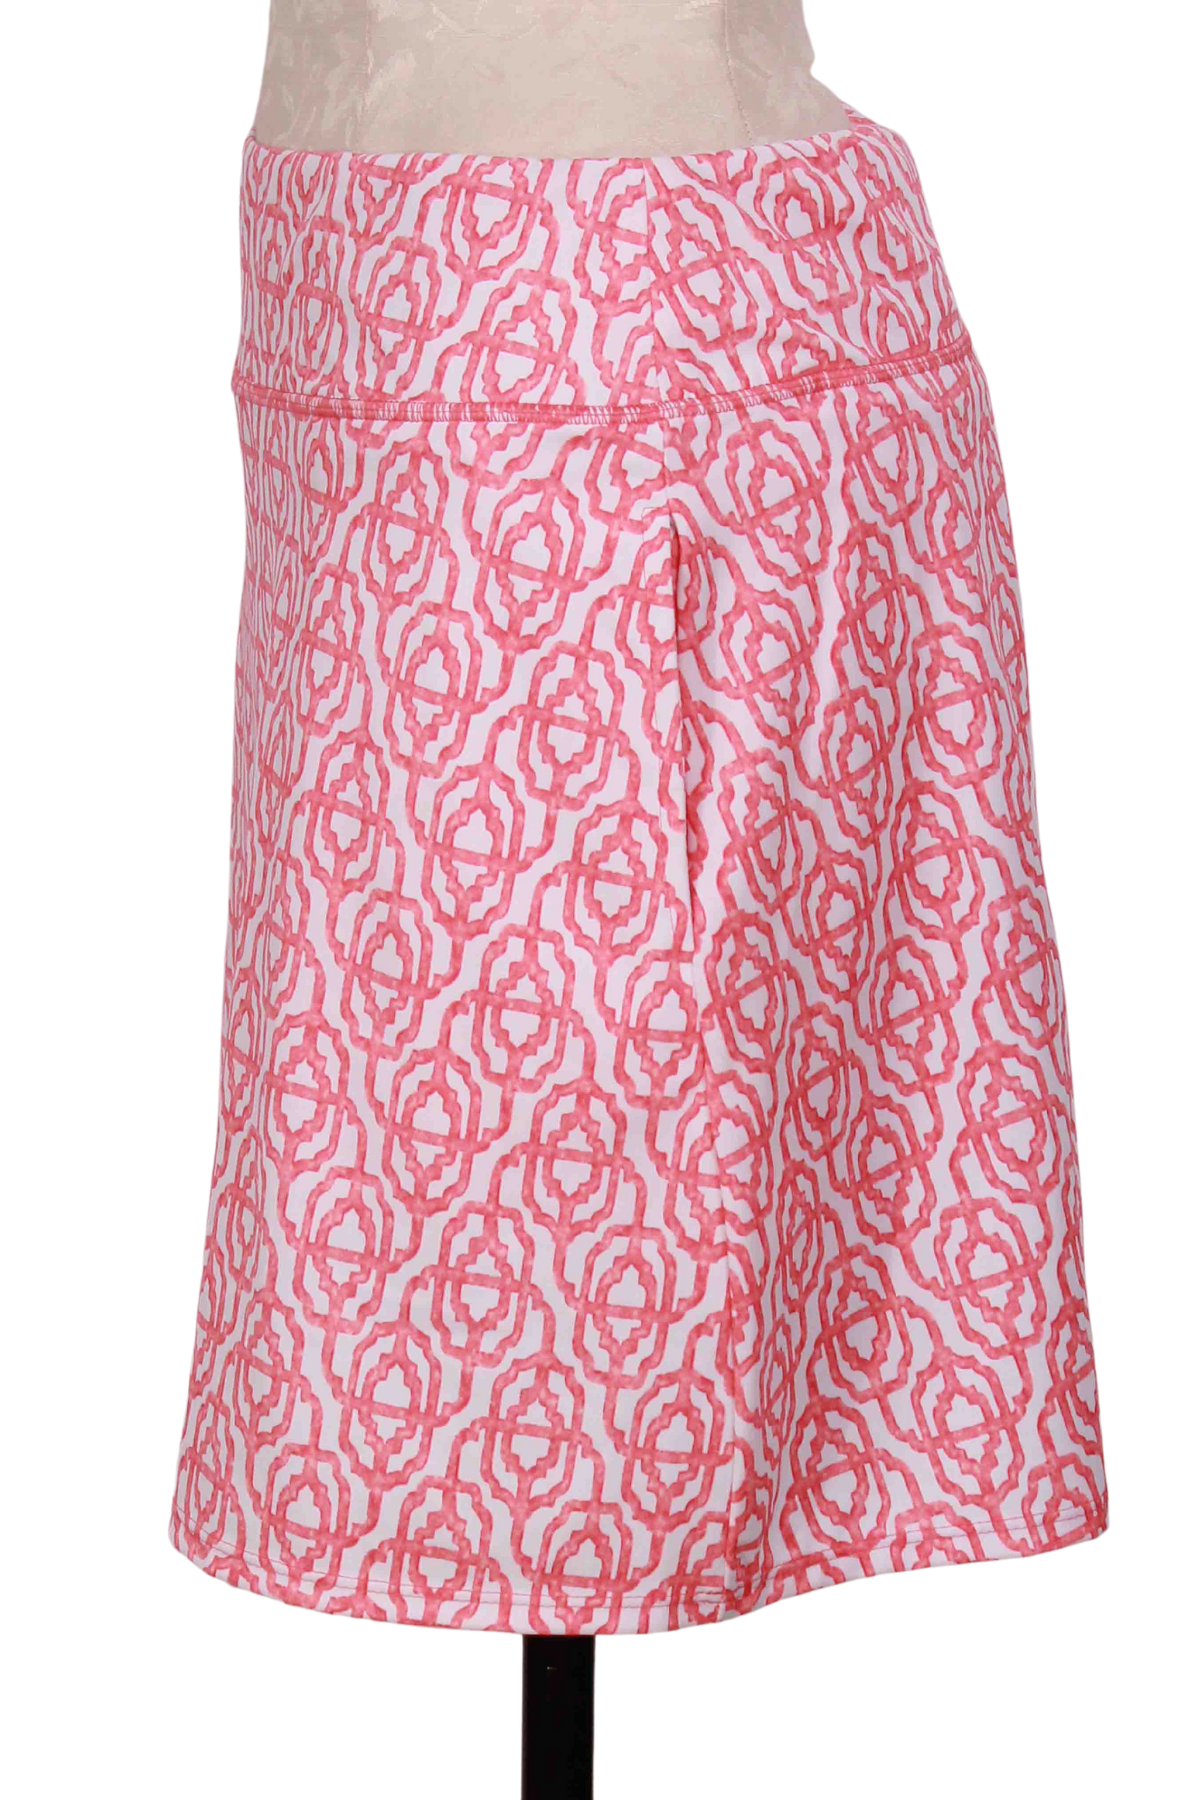 side view of Longer Skort with Napa Print by Cabana Life